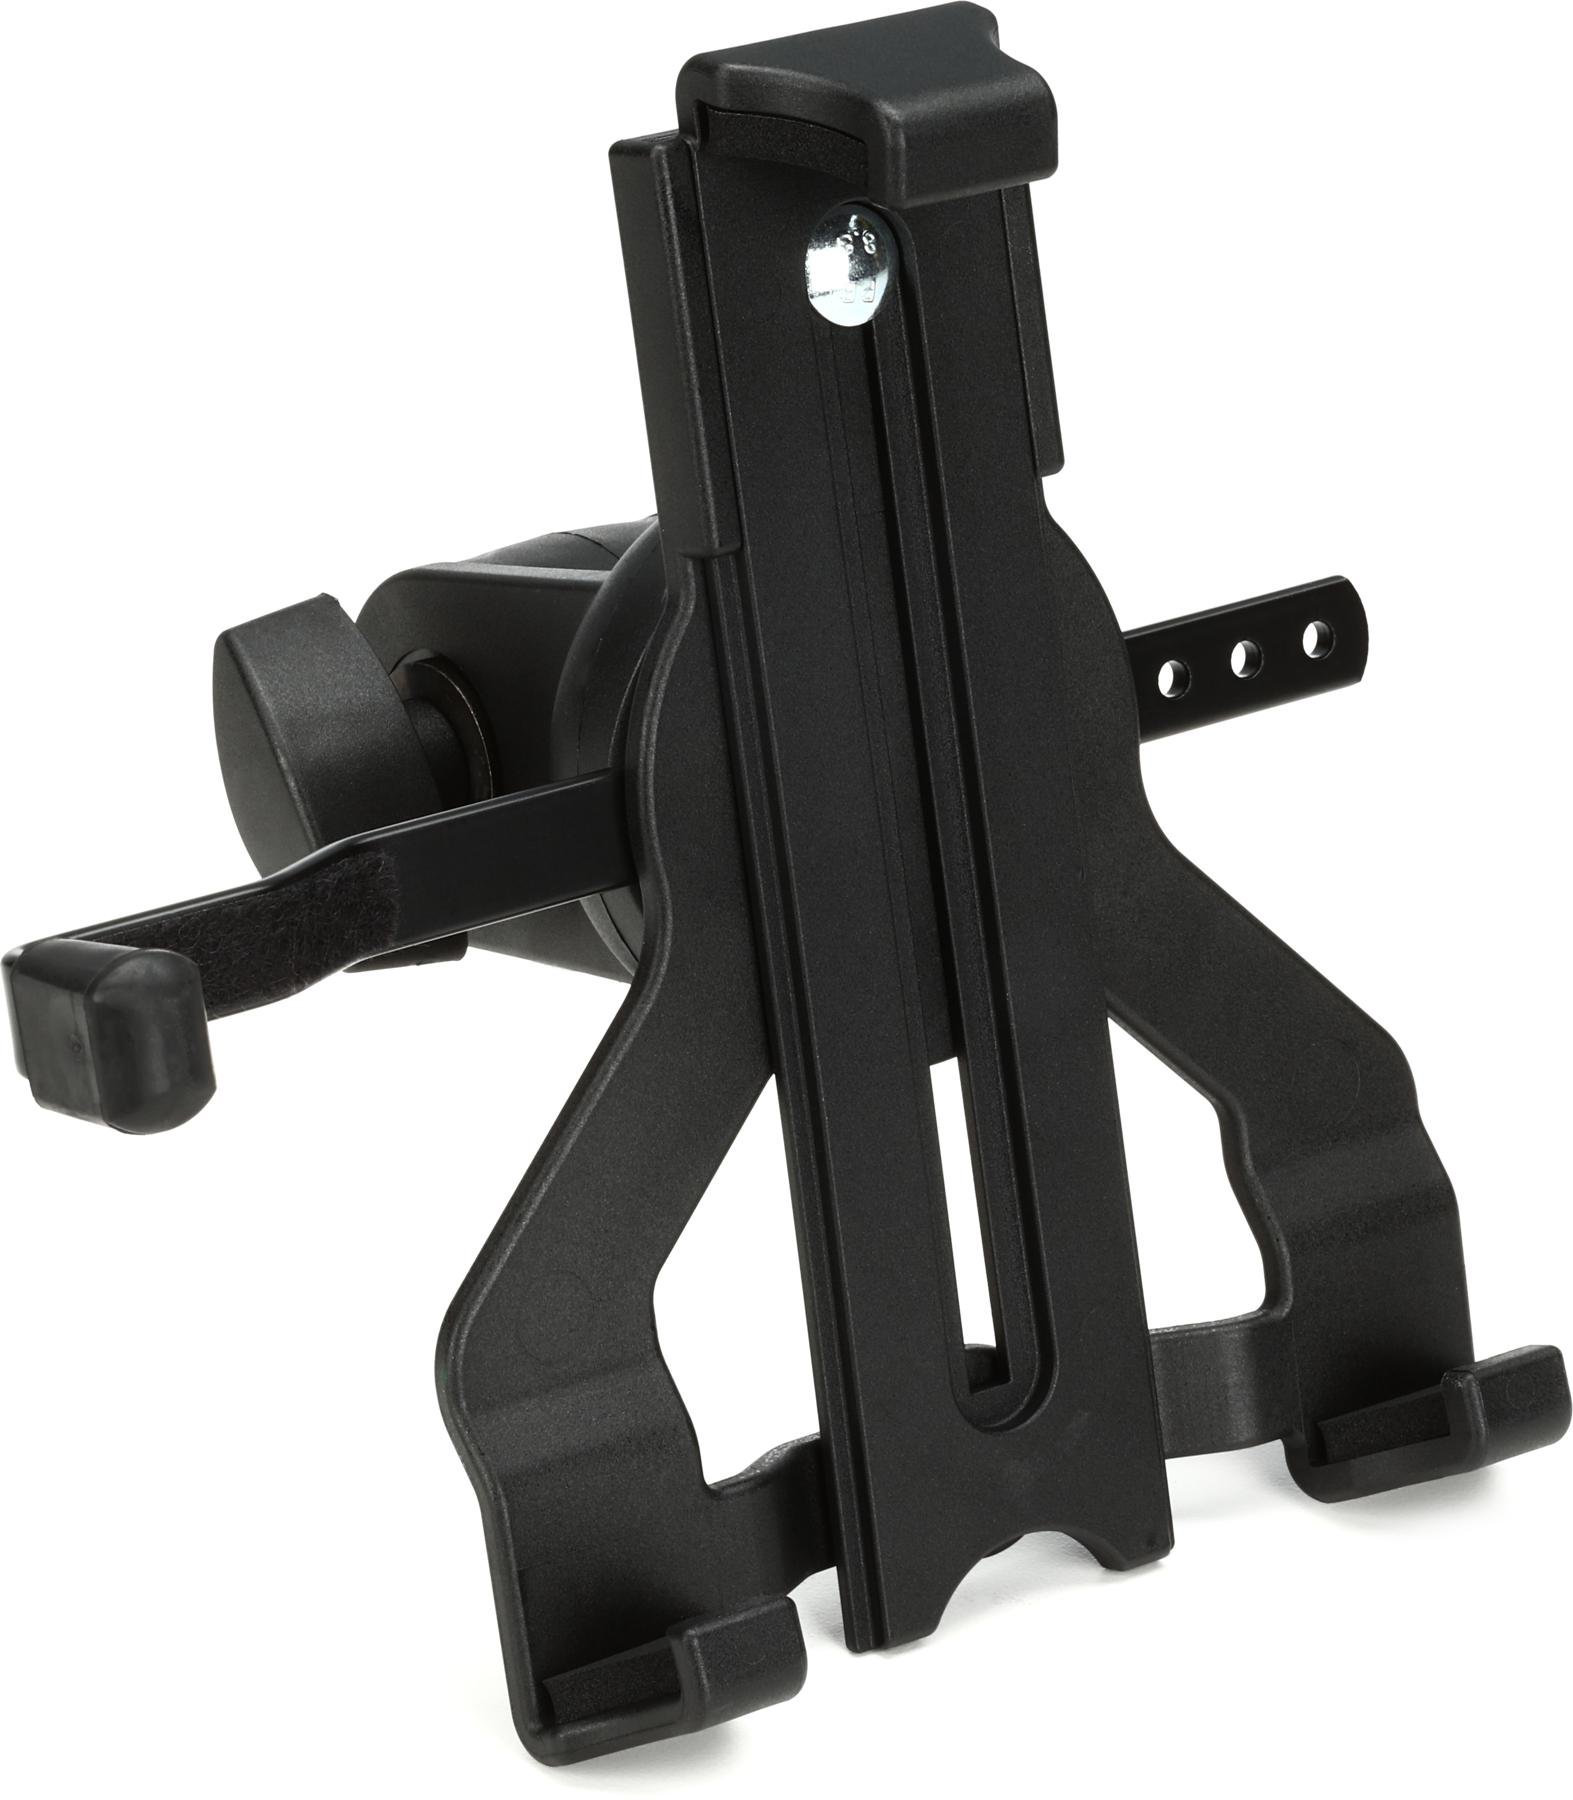 K&M 19744 Mic Stand Thread Tablet Holder | Sweetwater